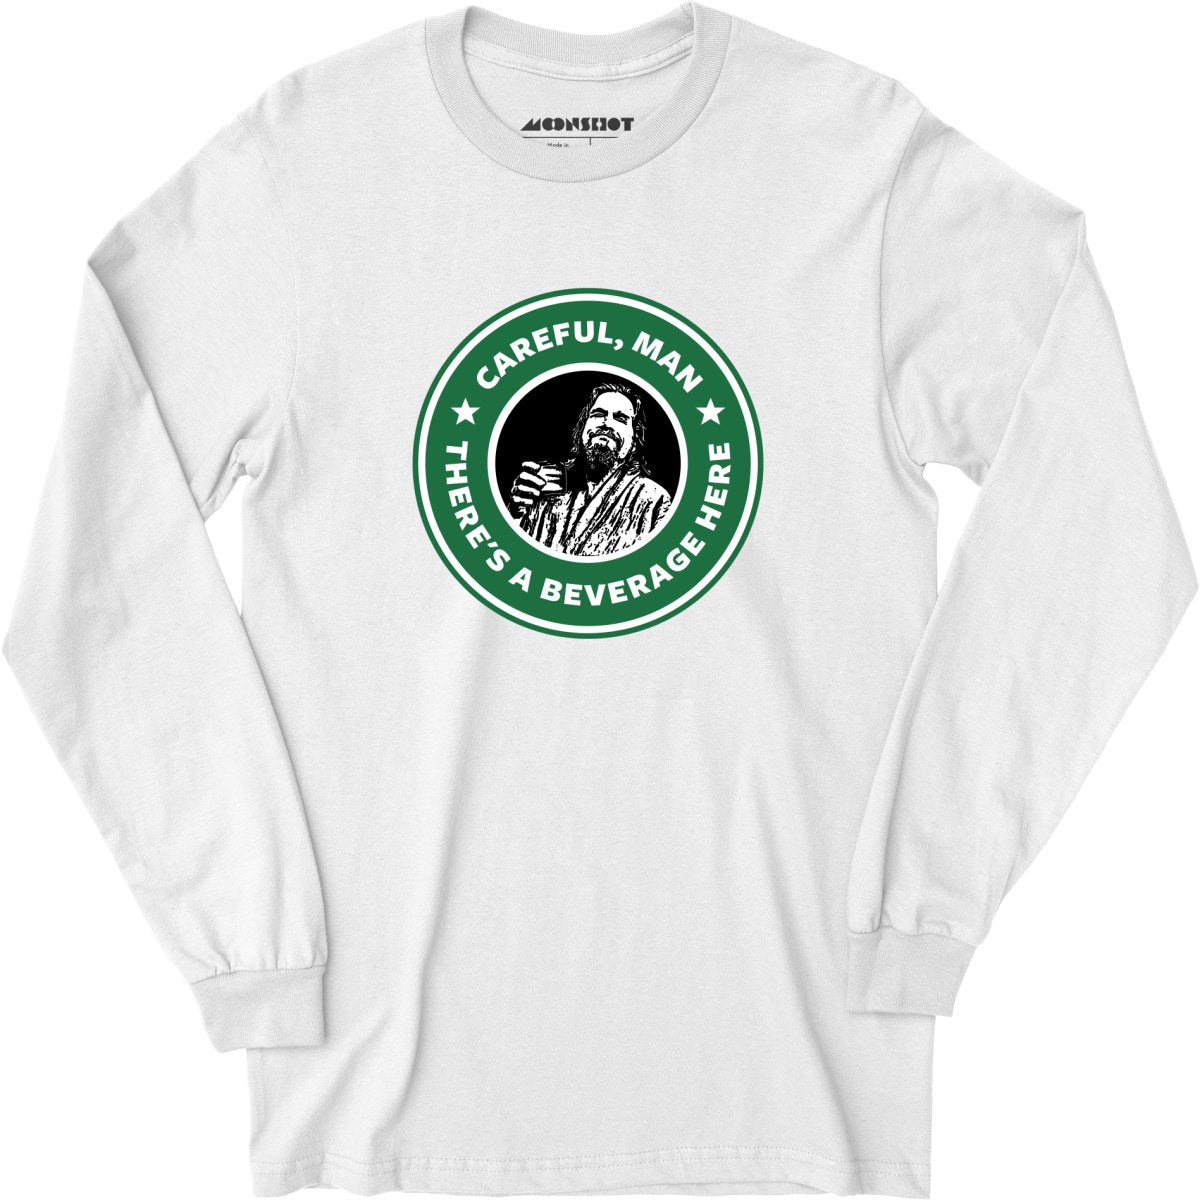 Lebowski - Careful, Man - There's a Beverage Here - Long Sleeve T-Shirt